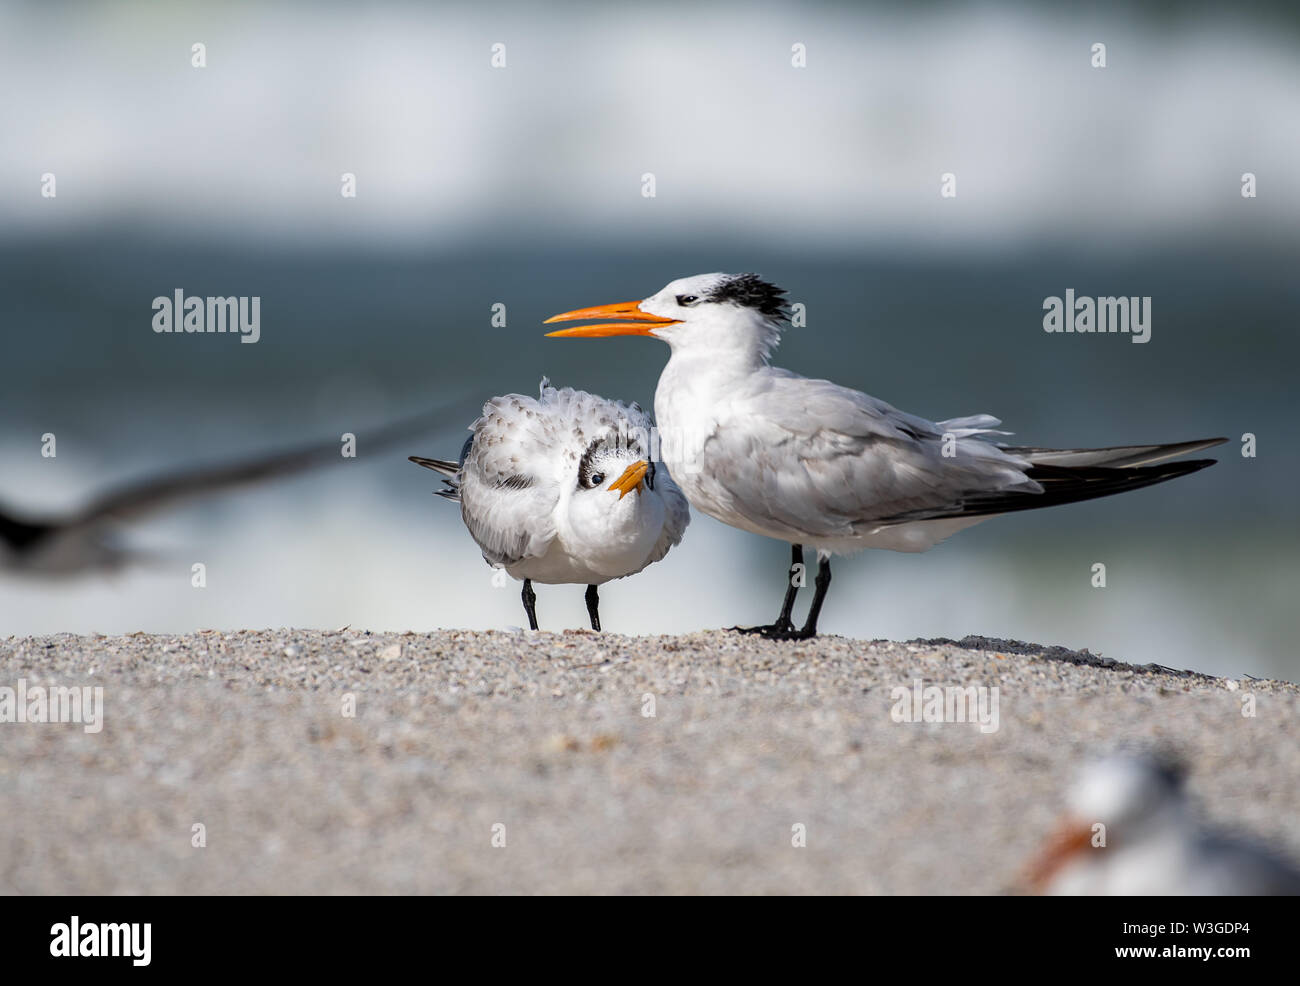 Shore birds with black crown - royal tern in Florida Stock Photo